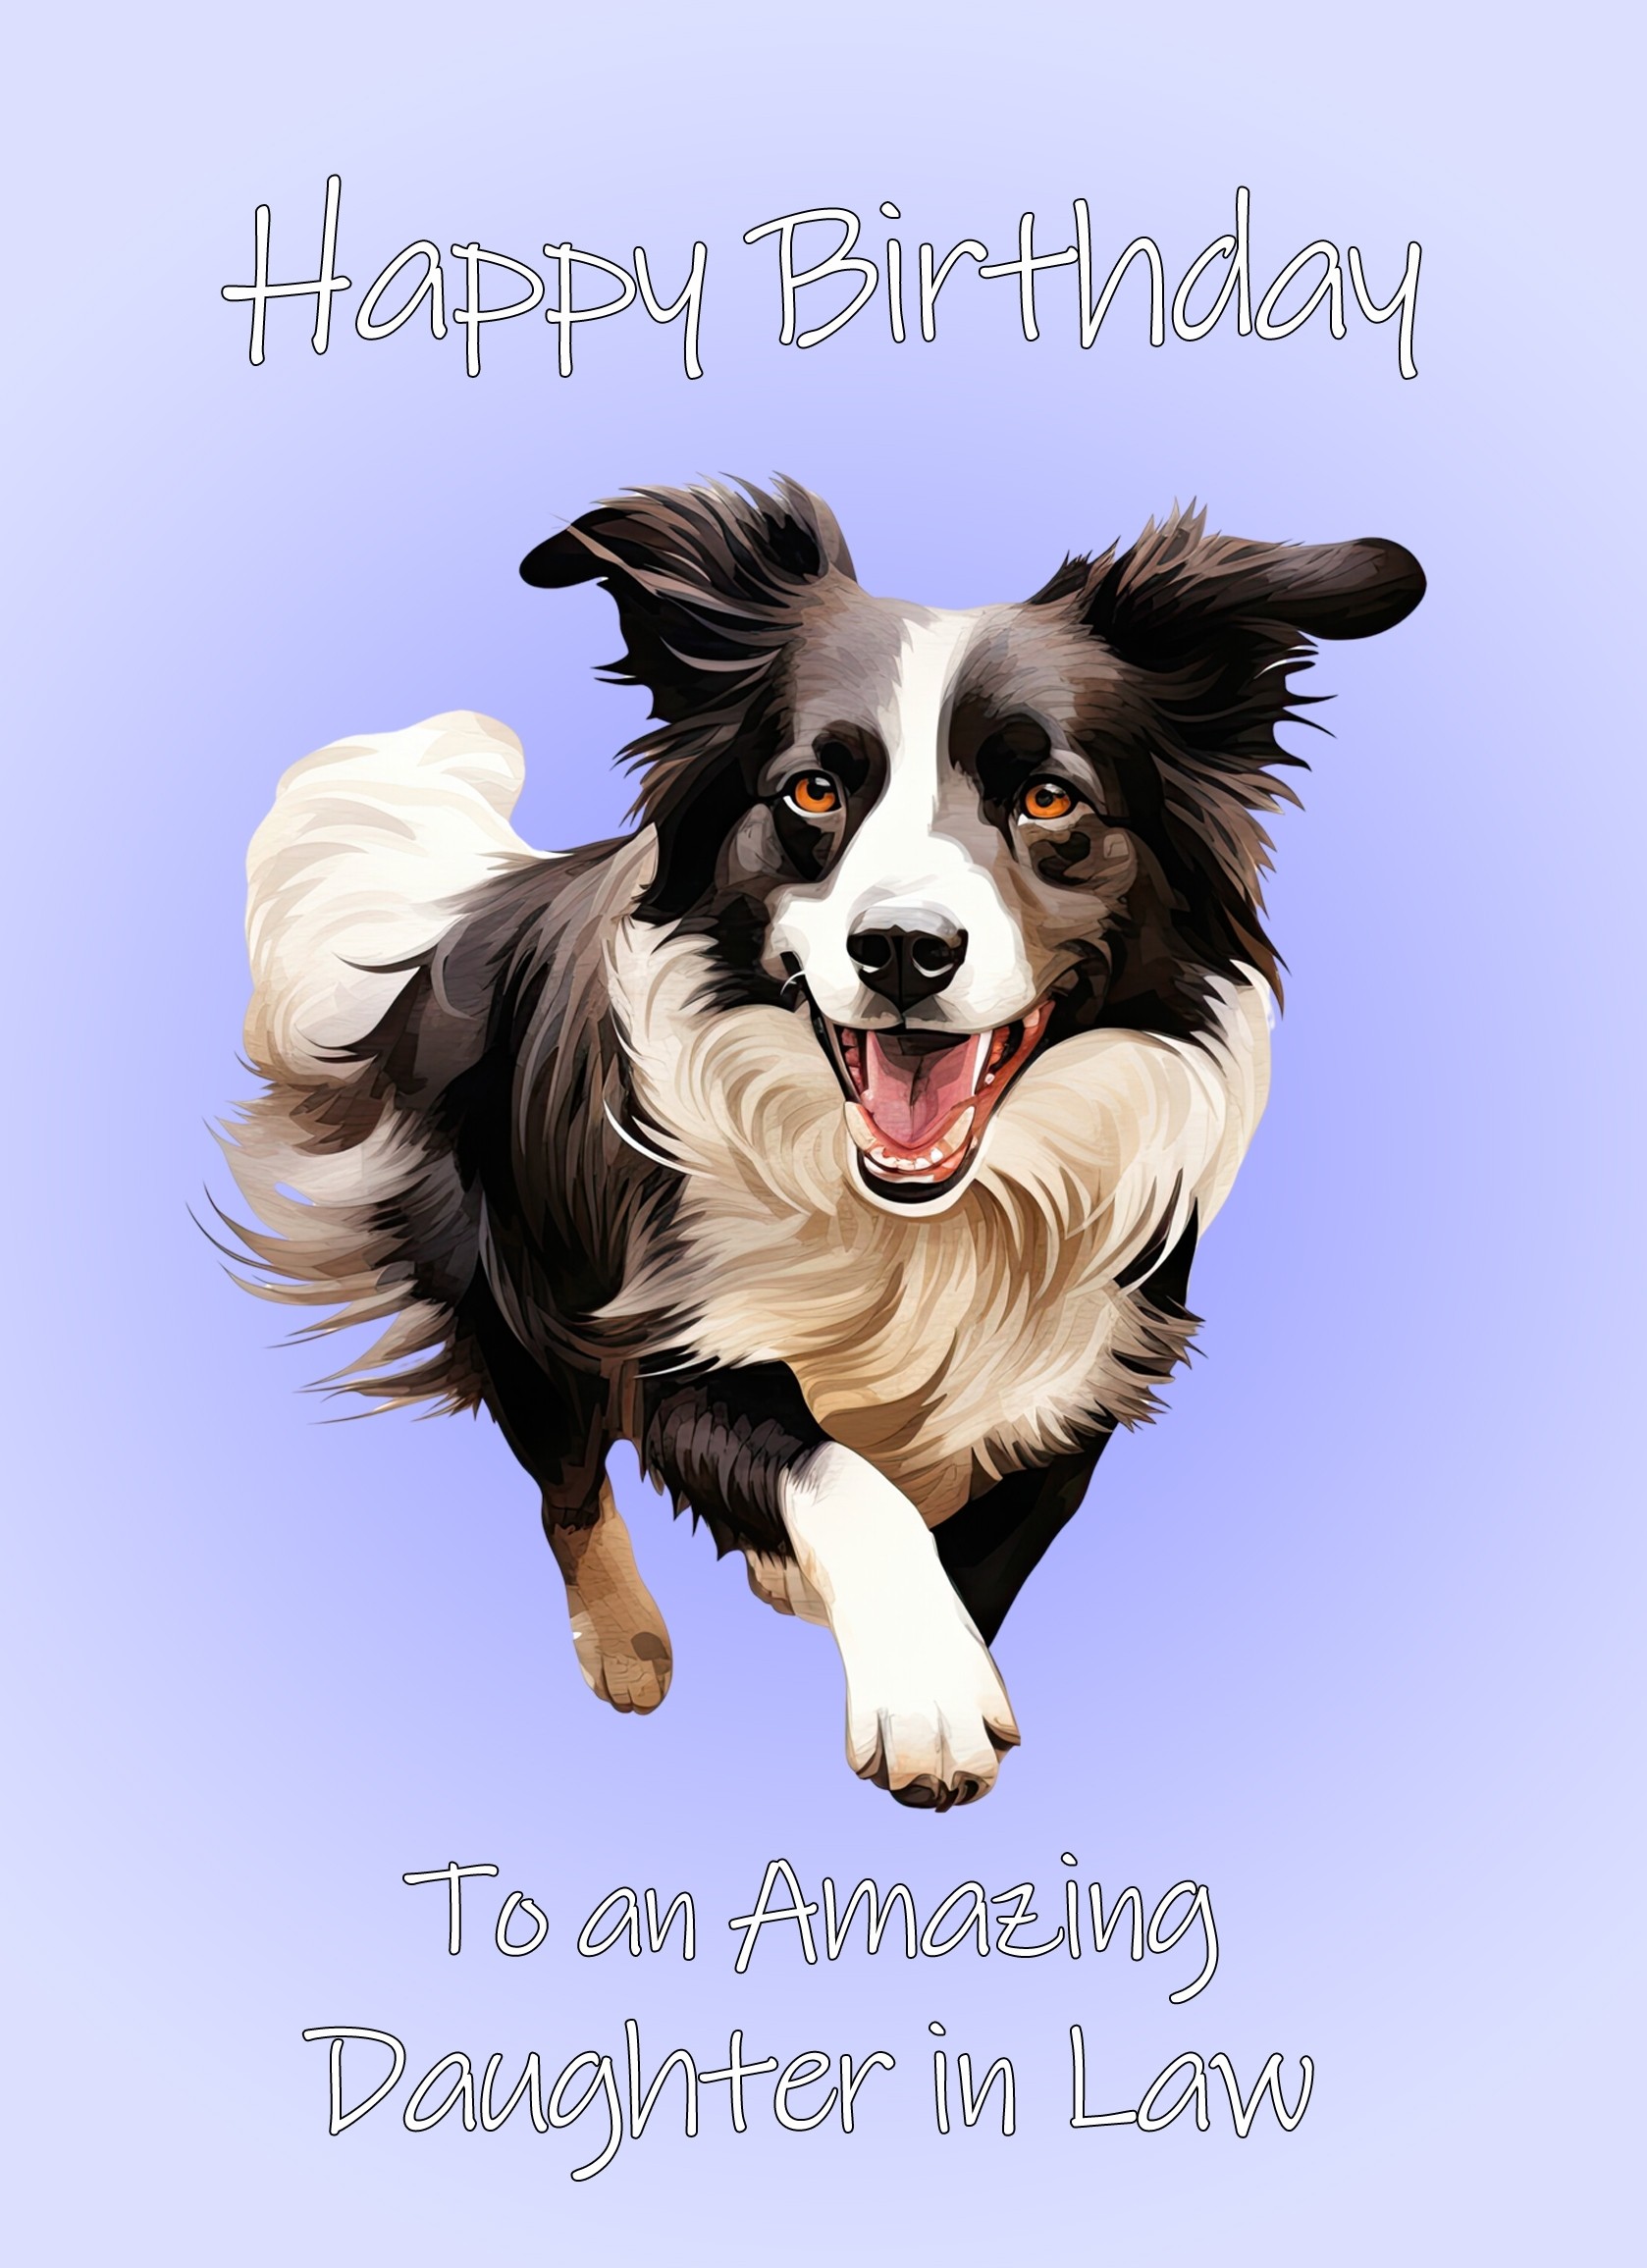 Border Collie Dog Birthday Card For Daughter in Law